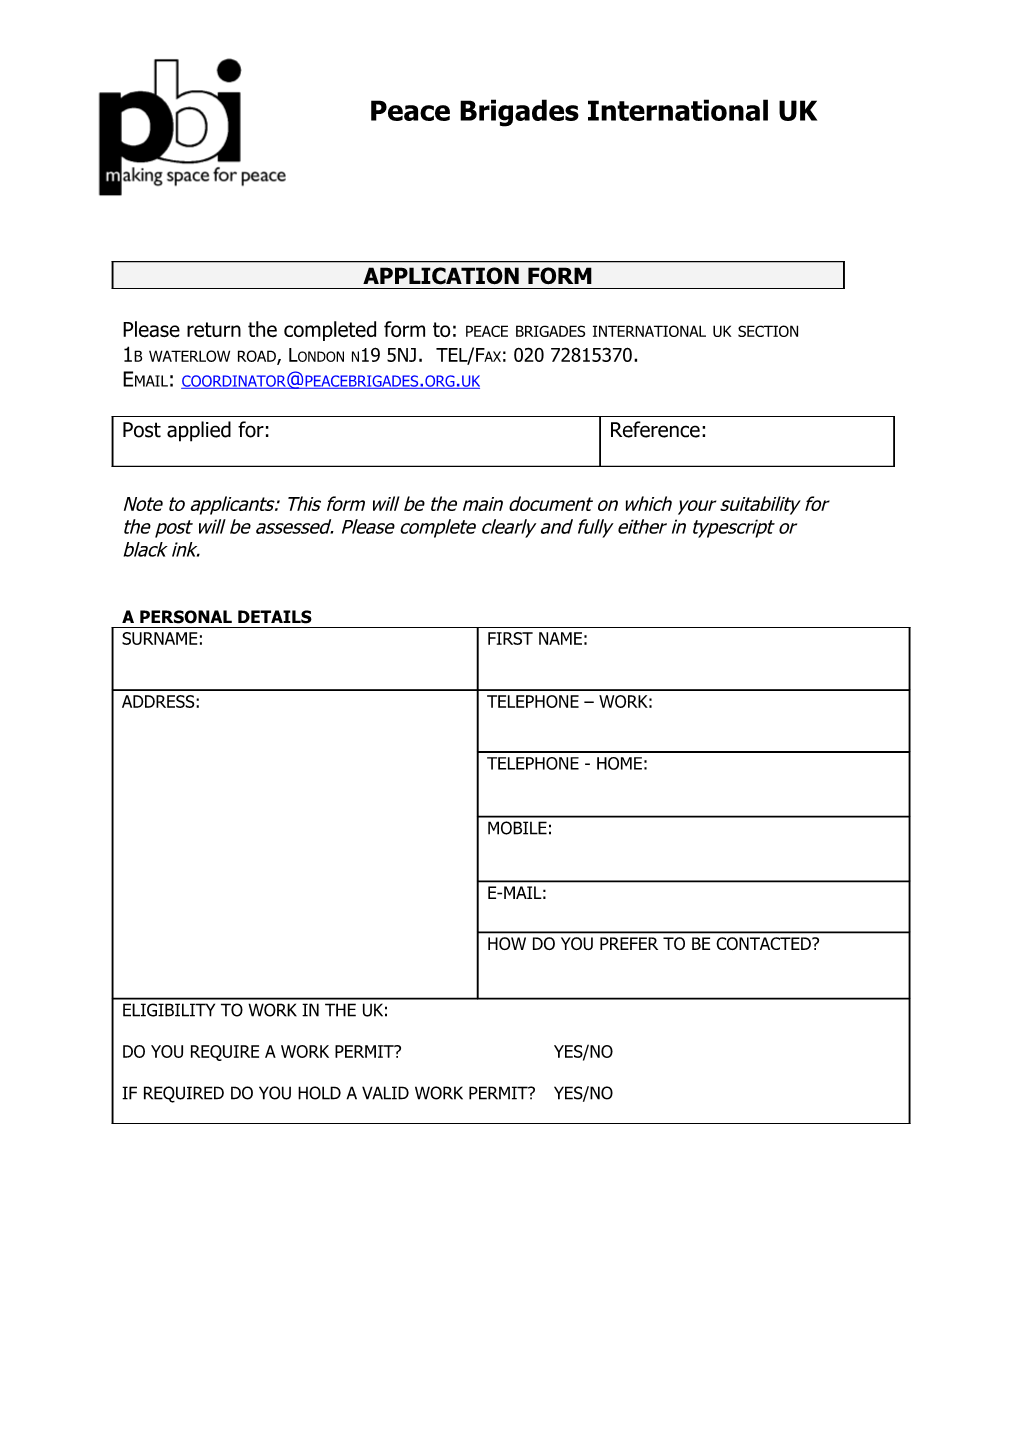 Panos Institute: Employment Application Form